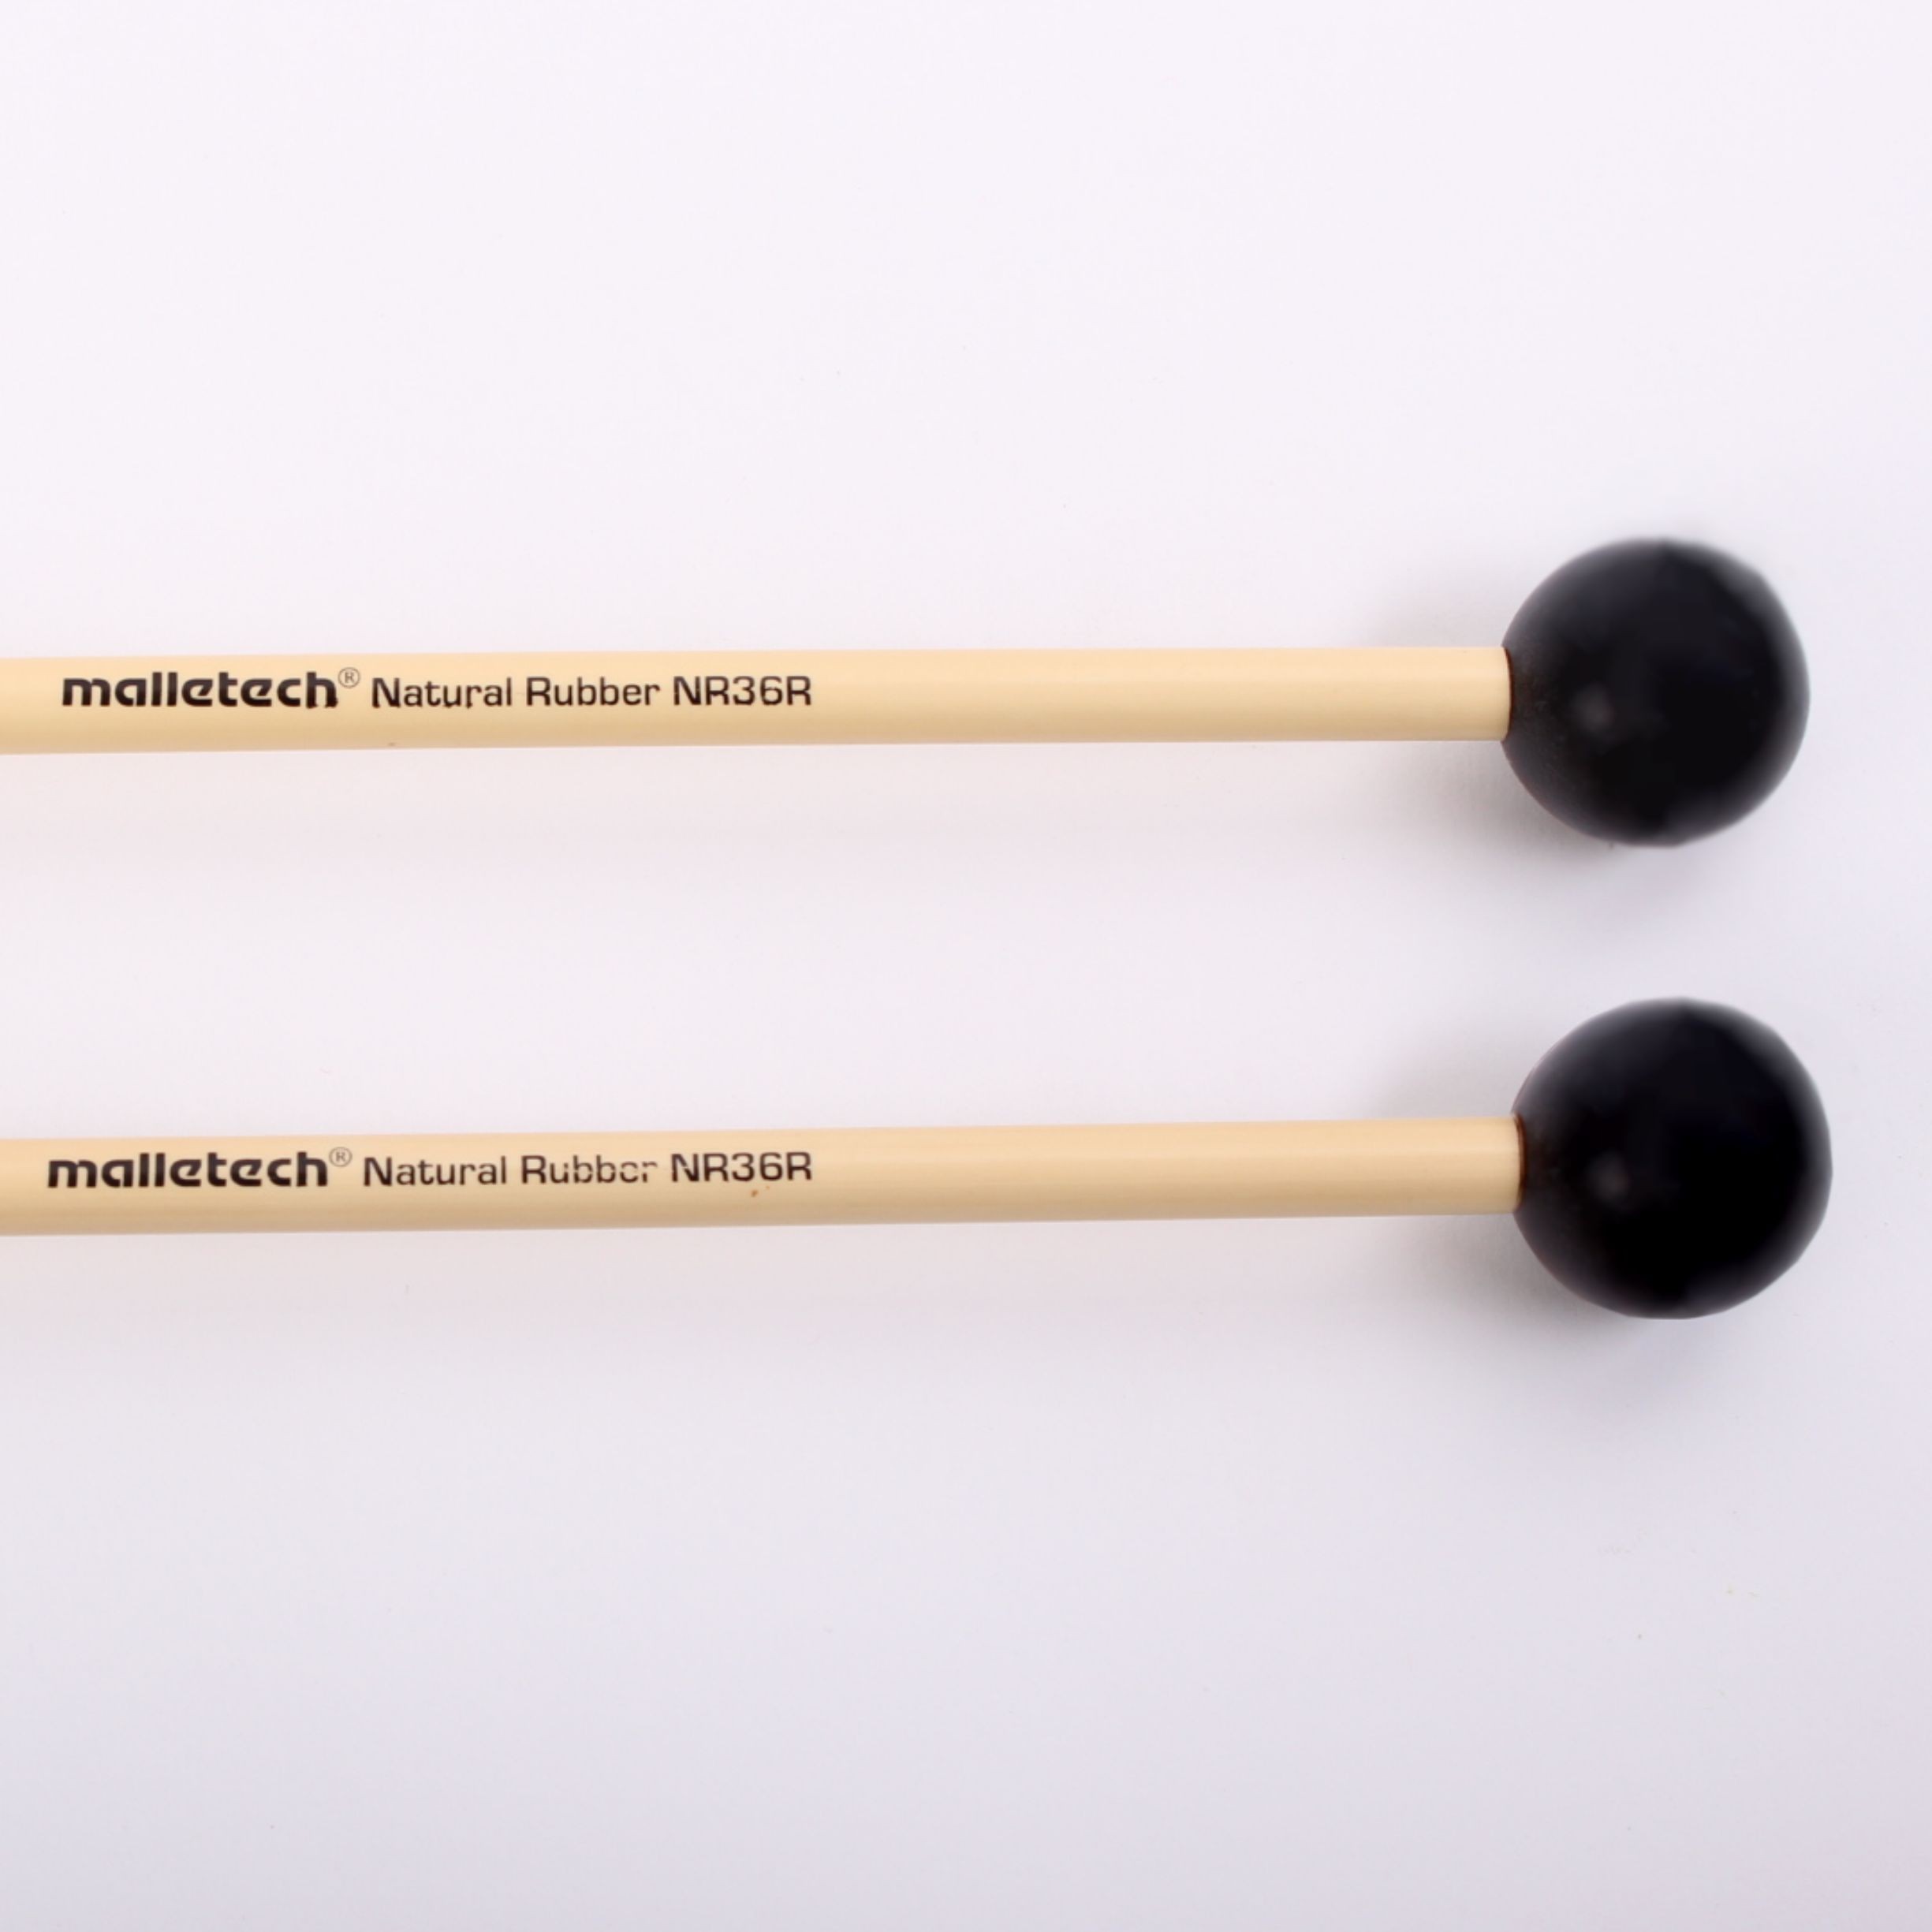 Malletech NR36 Natural Rubber Extra Hard Xylo/Bell Mallets